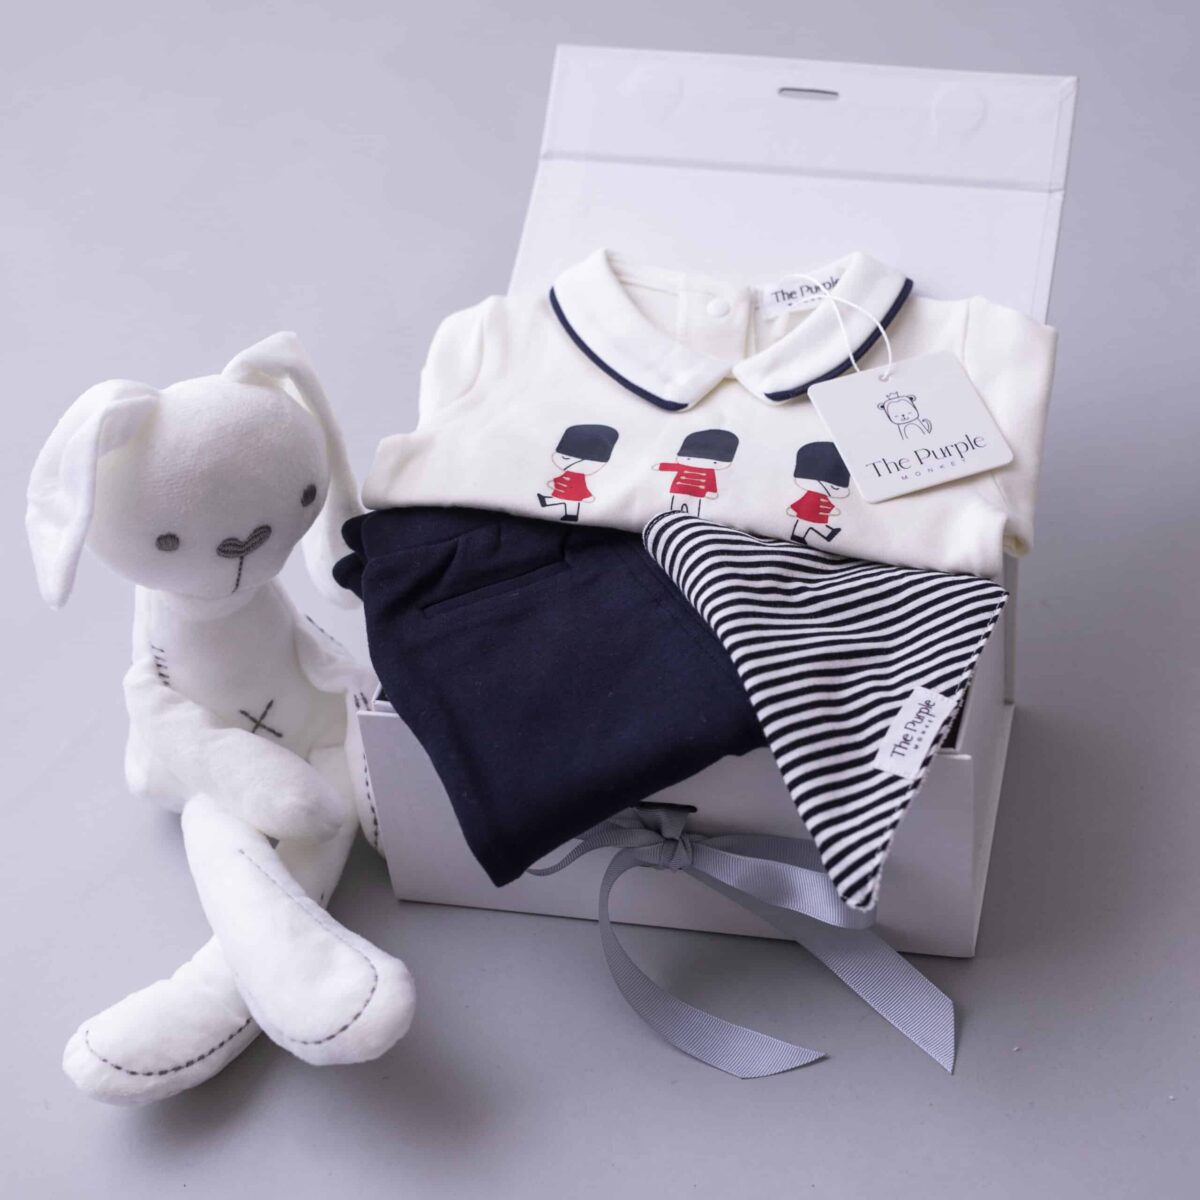 A timeless baby boy gift for the little prince in your life